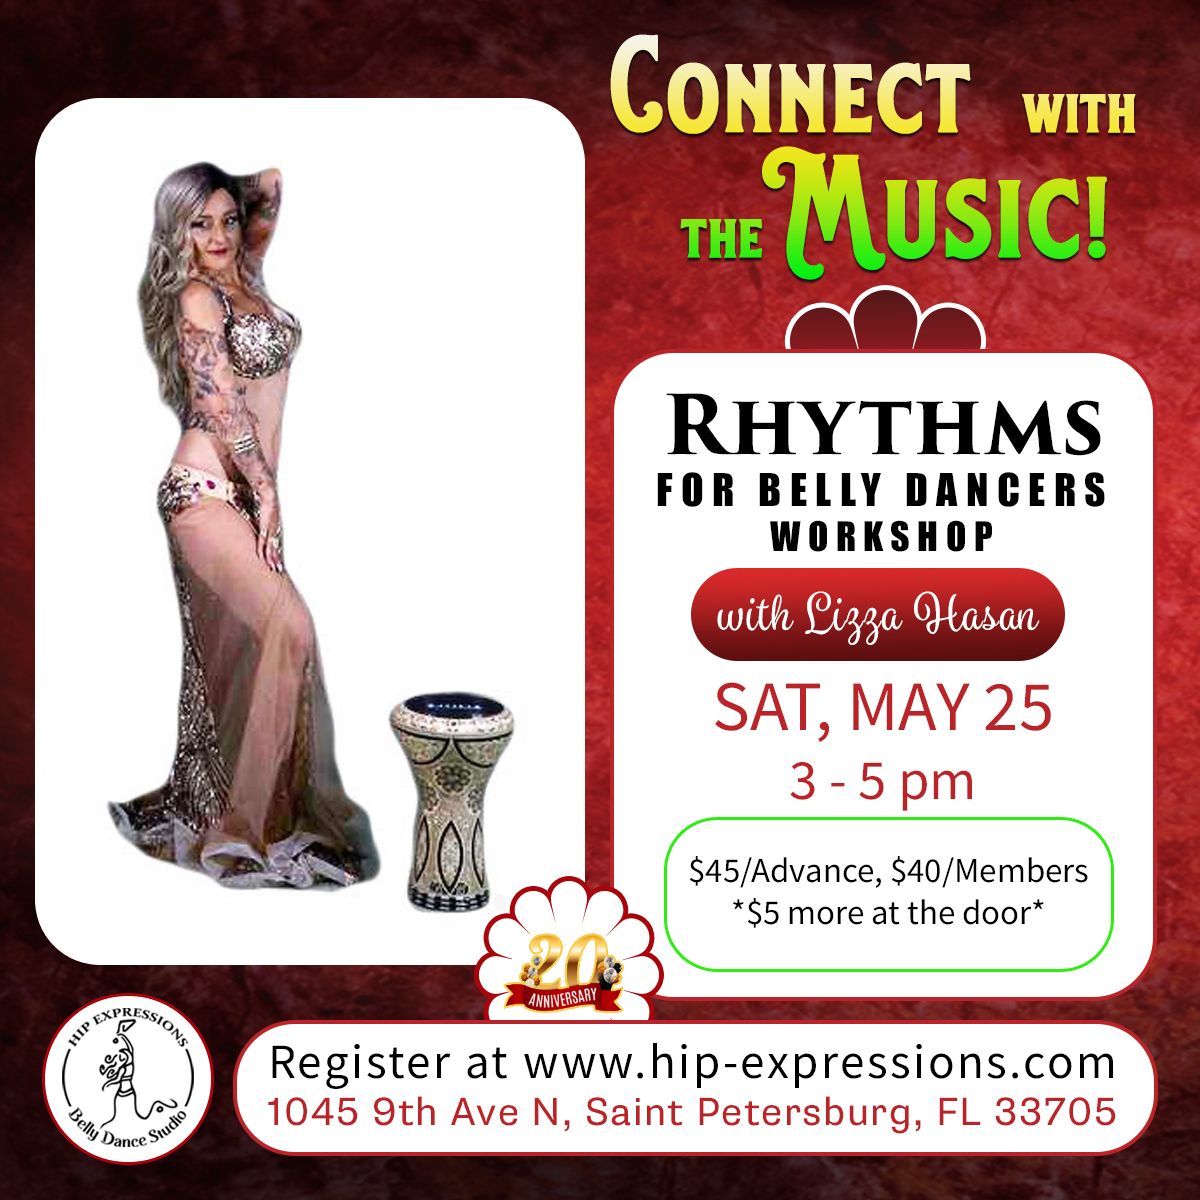 Rhythms for Belly Dancers Workshop with Lizza Hasan | May 25 | 3 - 5 pm | At Hip Expressions